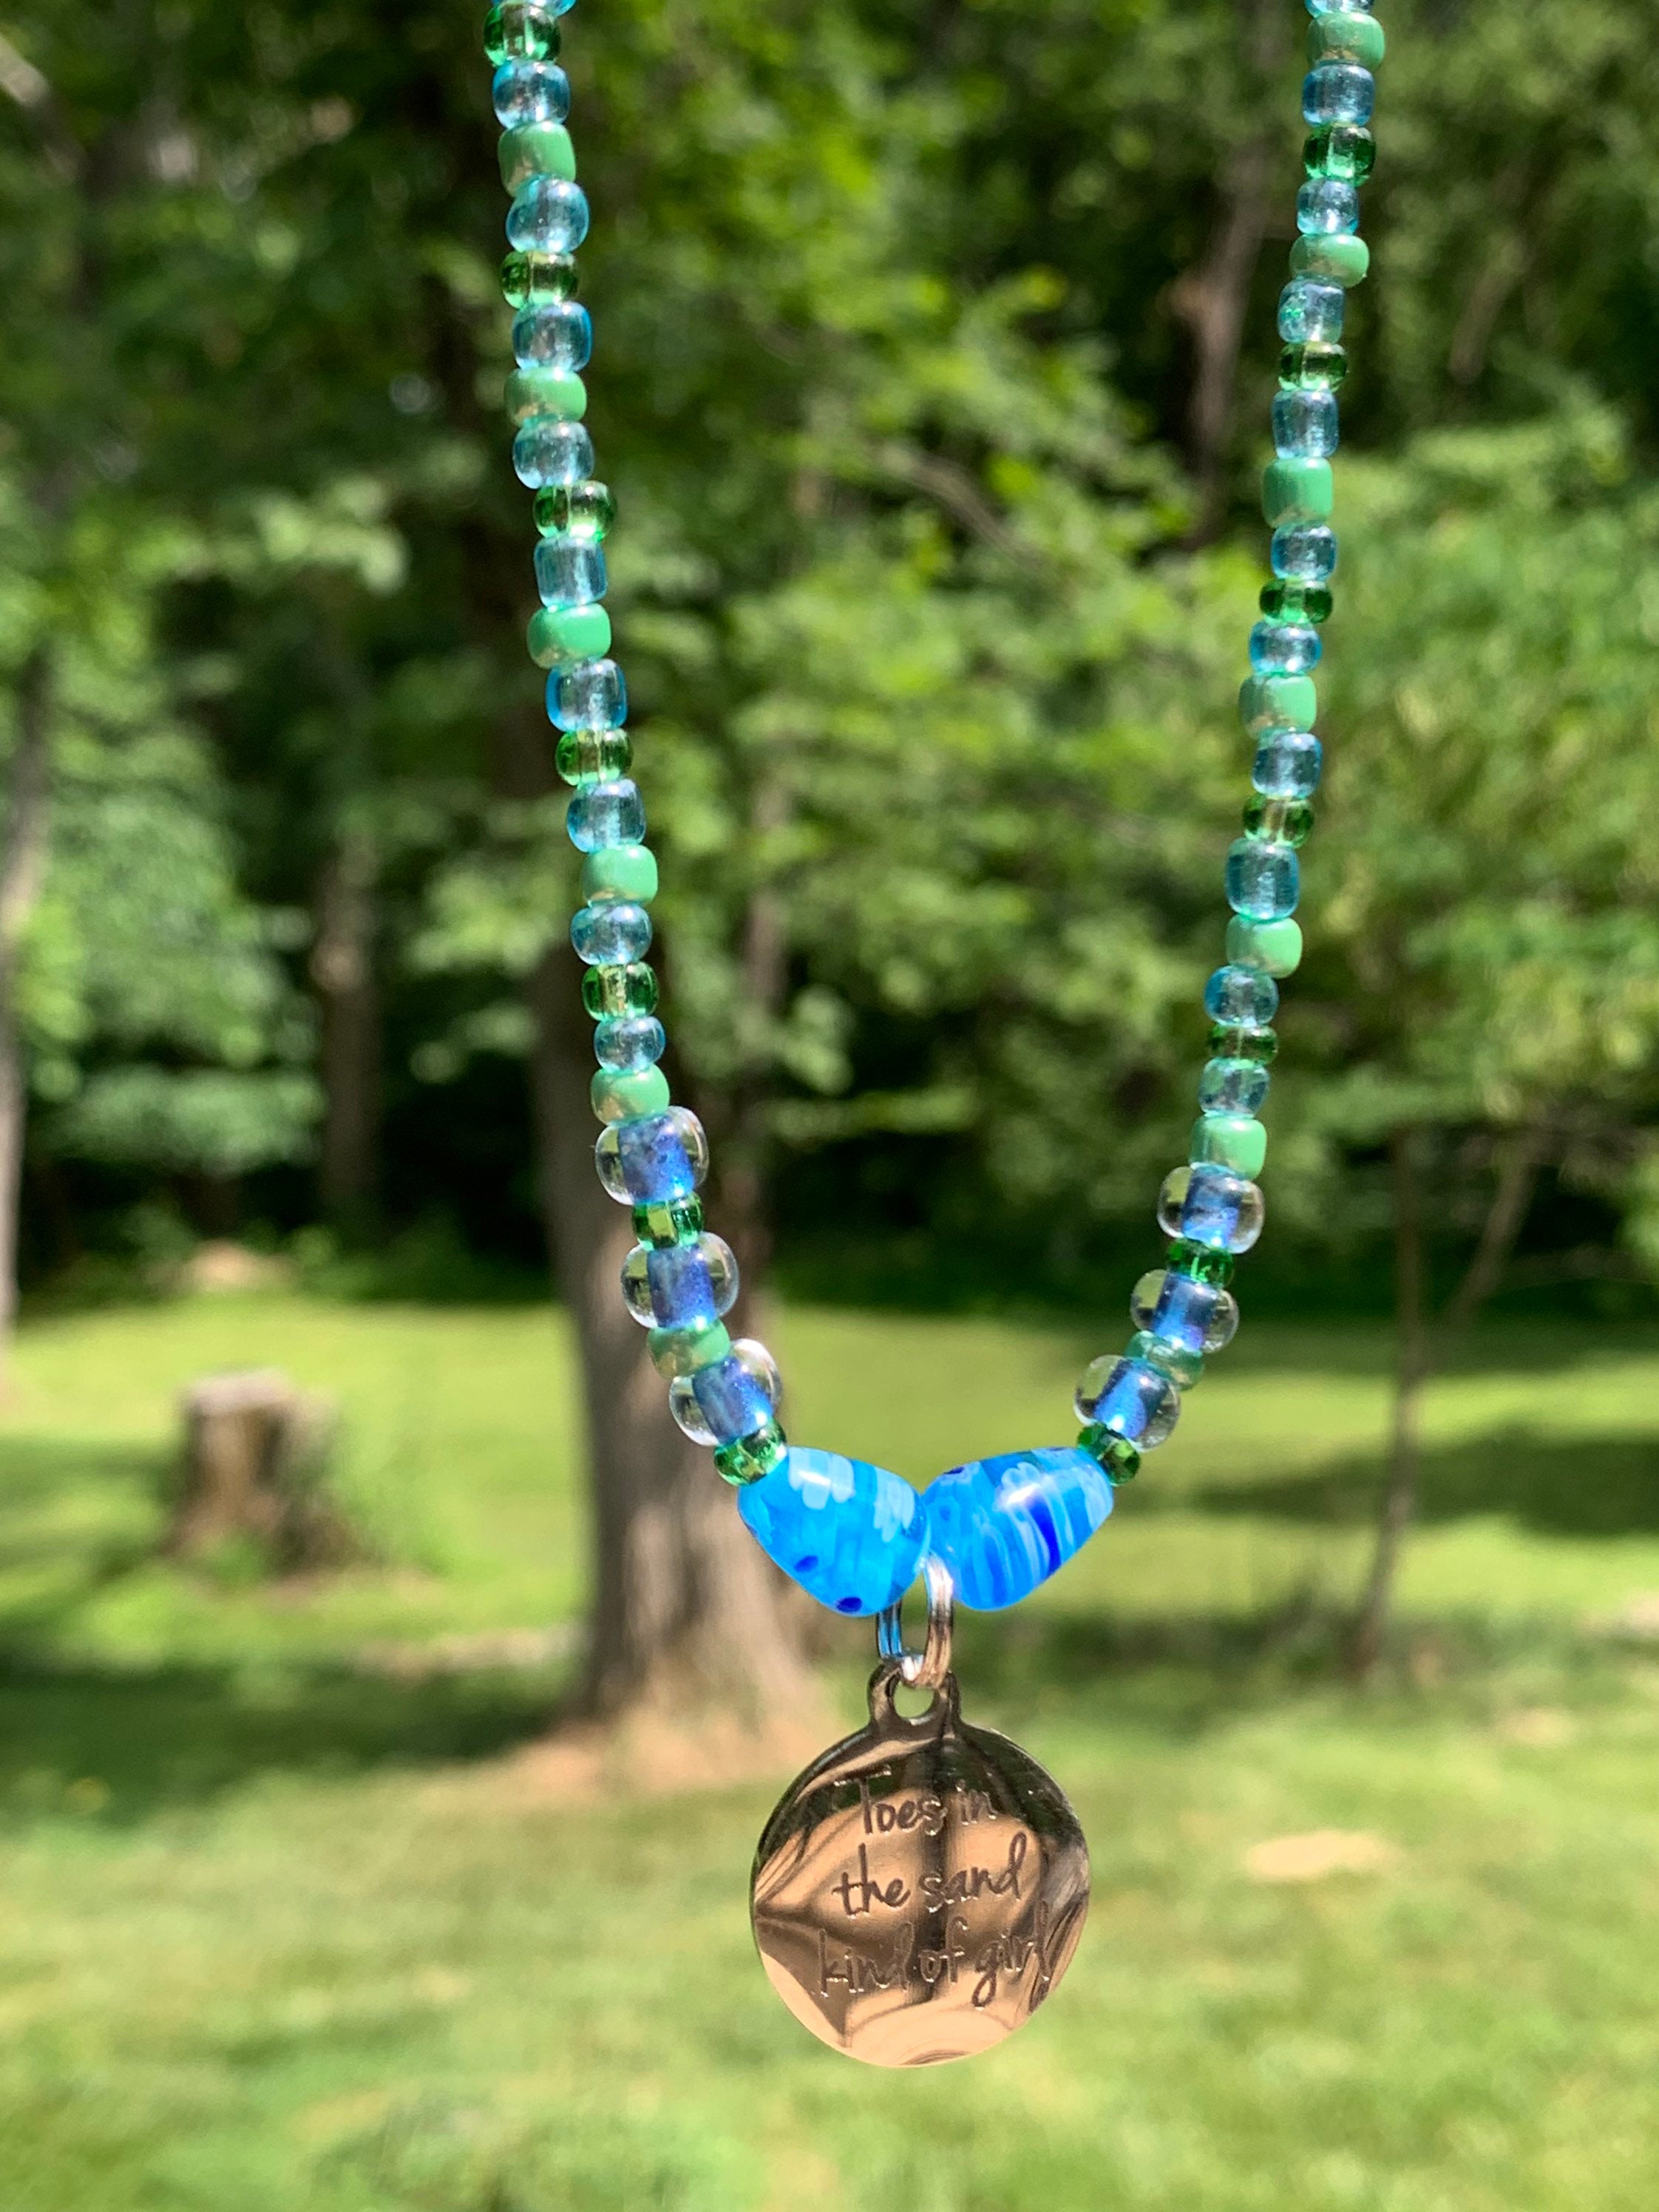 16 inch beaded necklace \u201cToes in the sand kind of girl\u201d Ocean blue and green